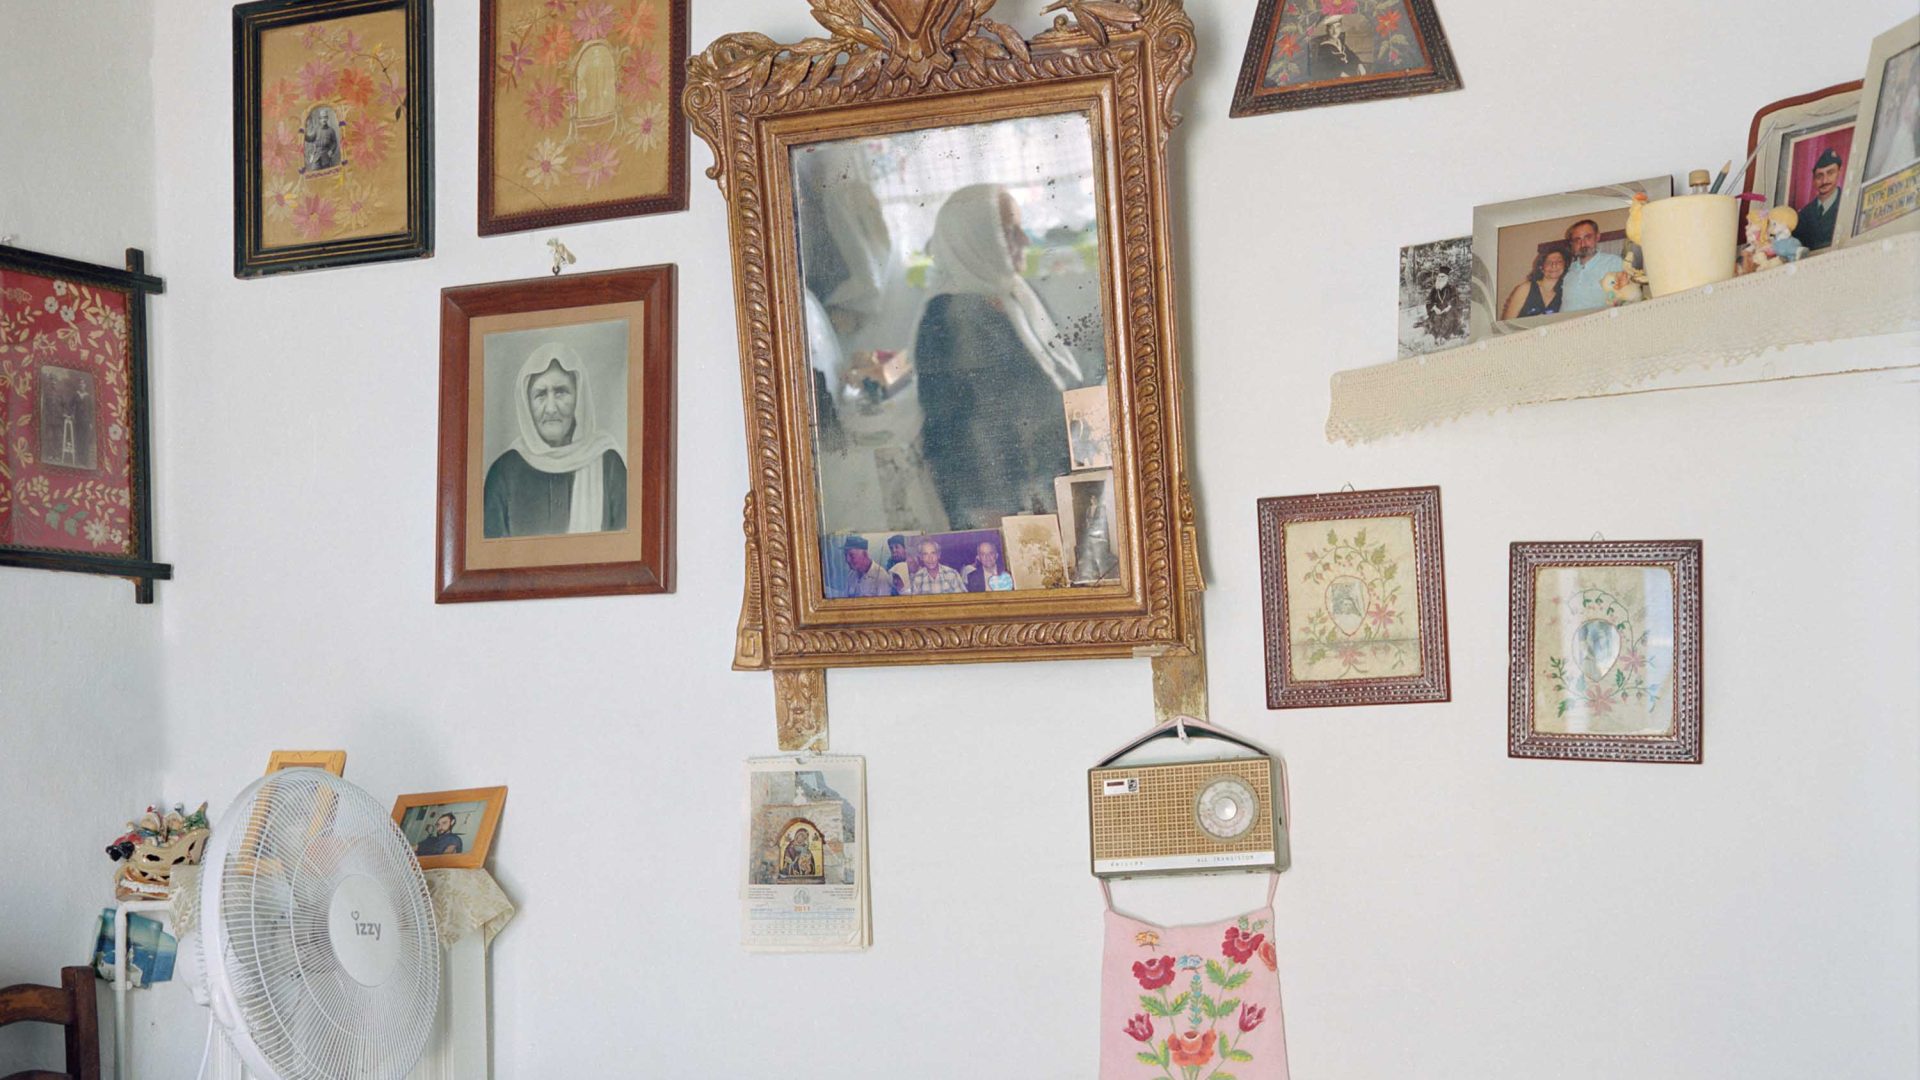 Photos in frames on a wall.